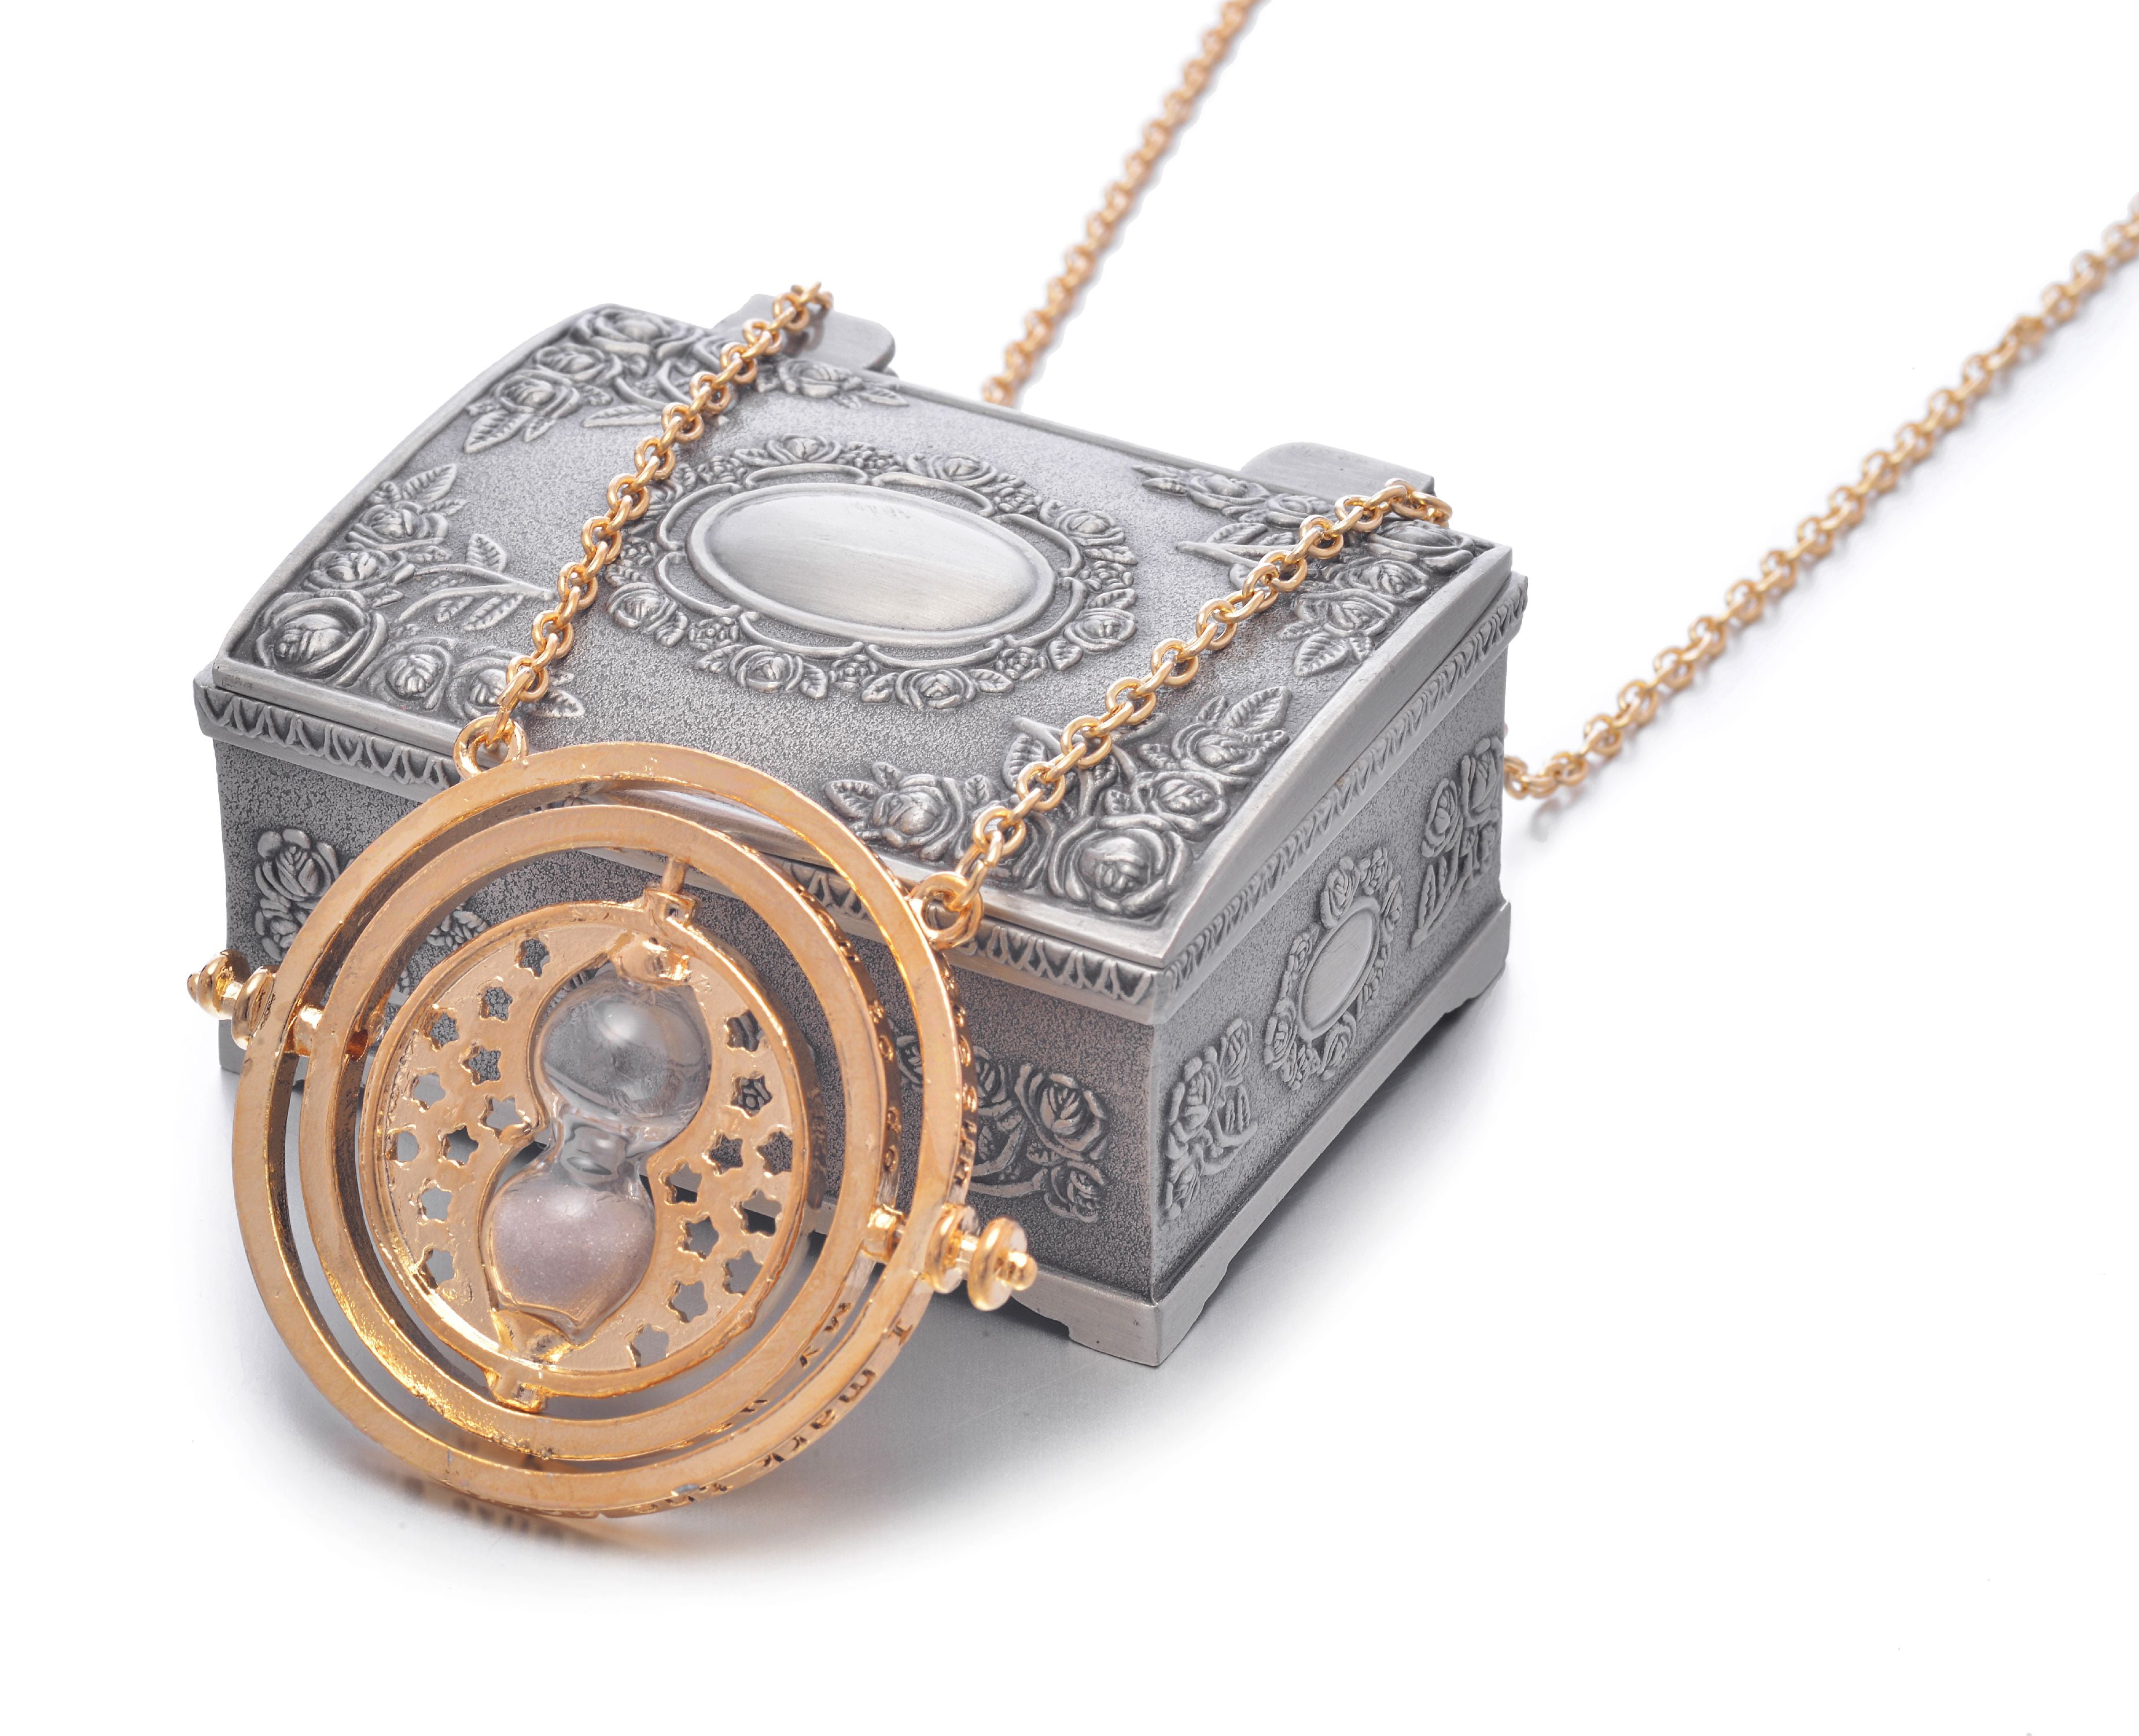 Hermione's Time Turner - Props and Collectibles